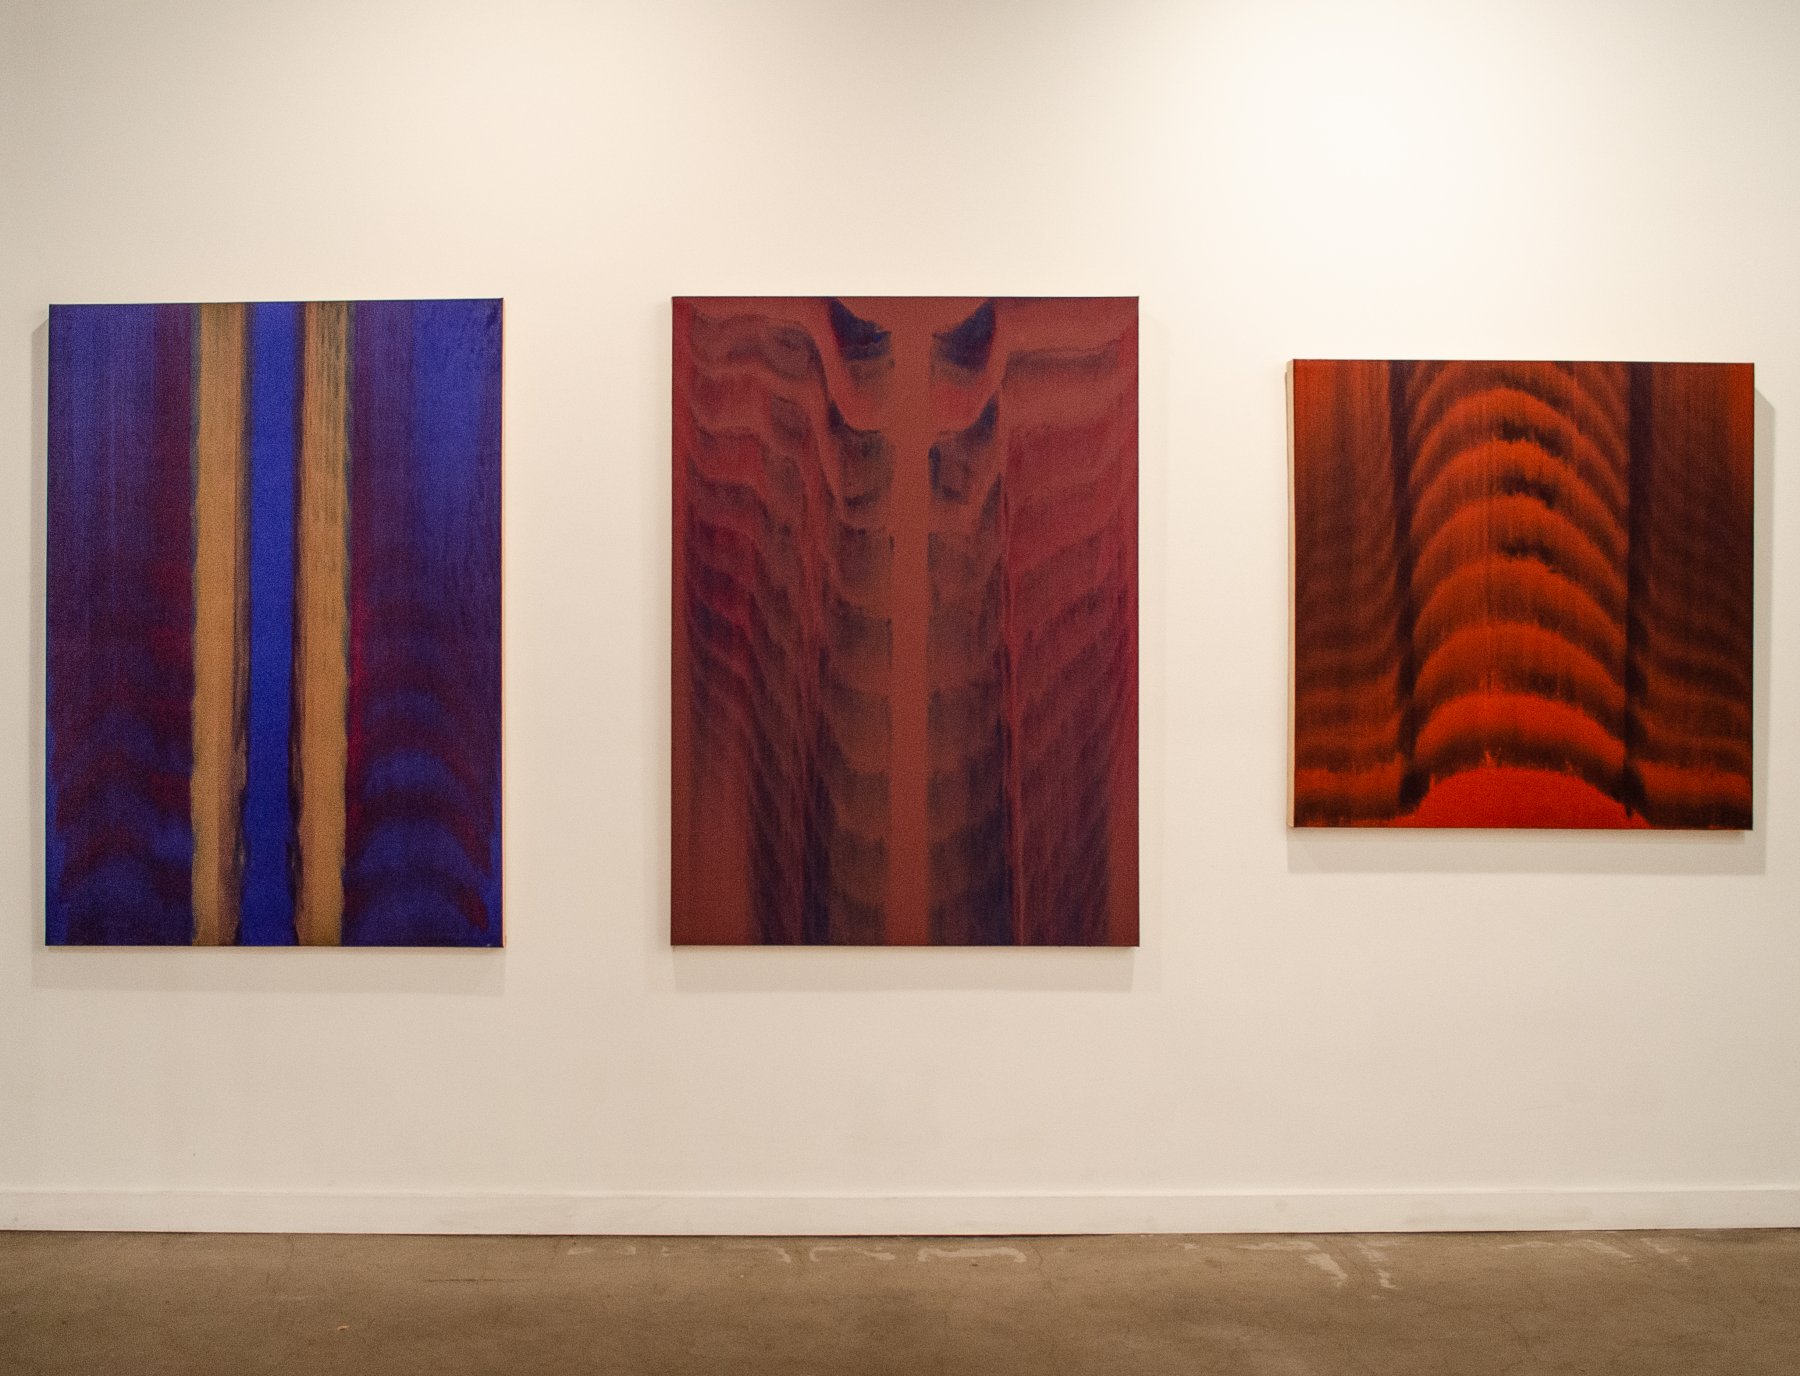 Installation image for Gene Hedge: The Pattern of Nature, at Lincoln Glenn